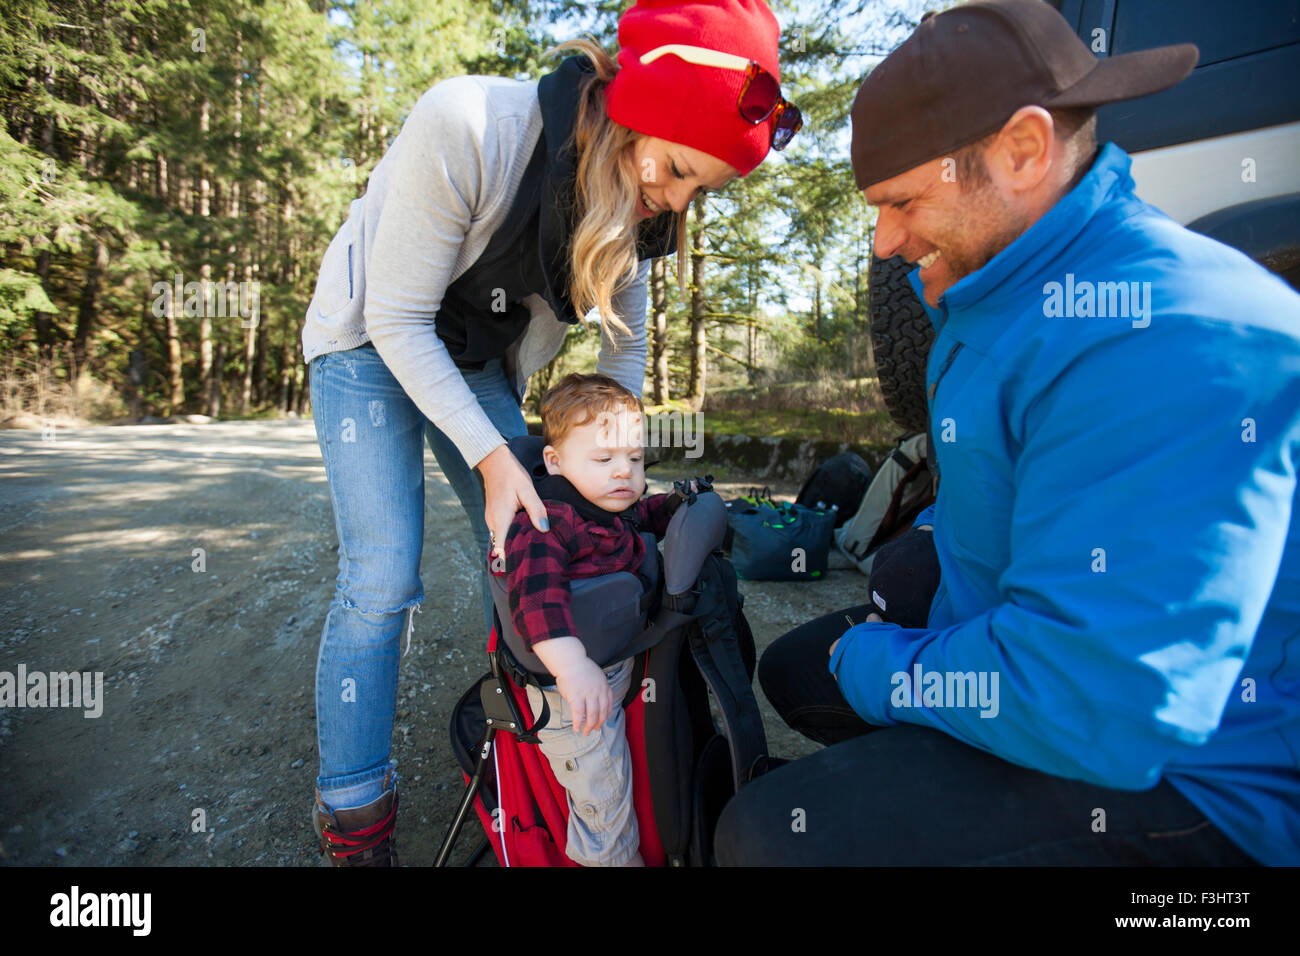 Young parents prepare for a backpacking trip with their child. Stock Photo